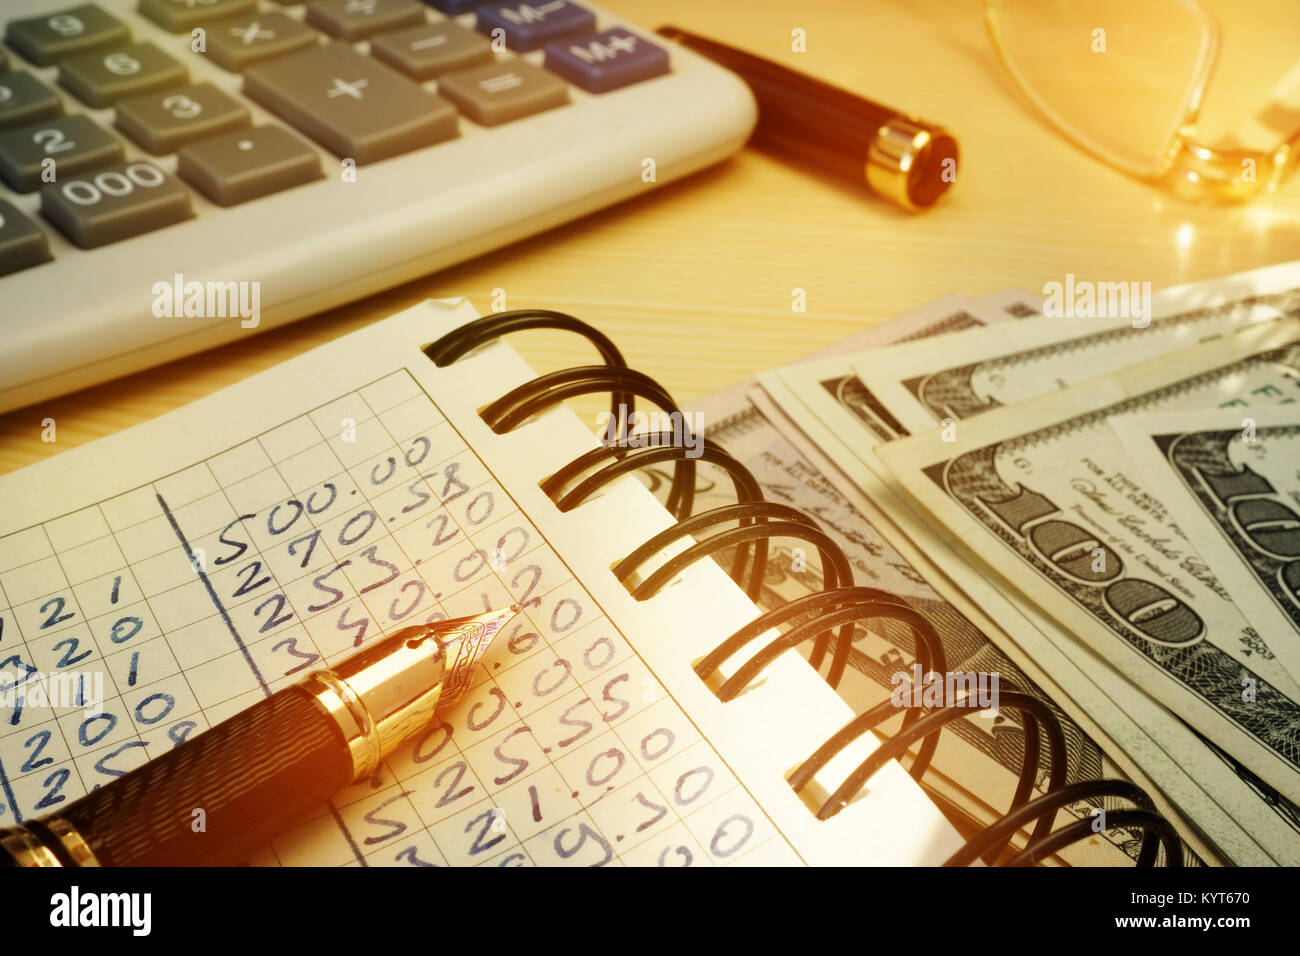 Budgeting money. Book with calculations, calculator and dollars. Stock Photo